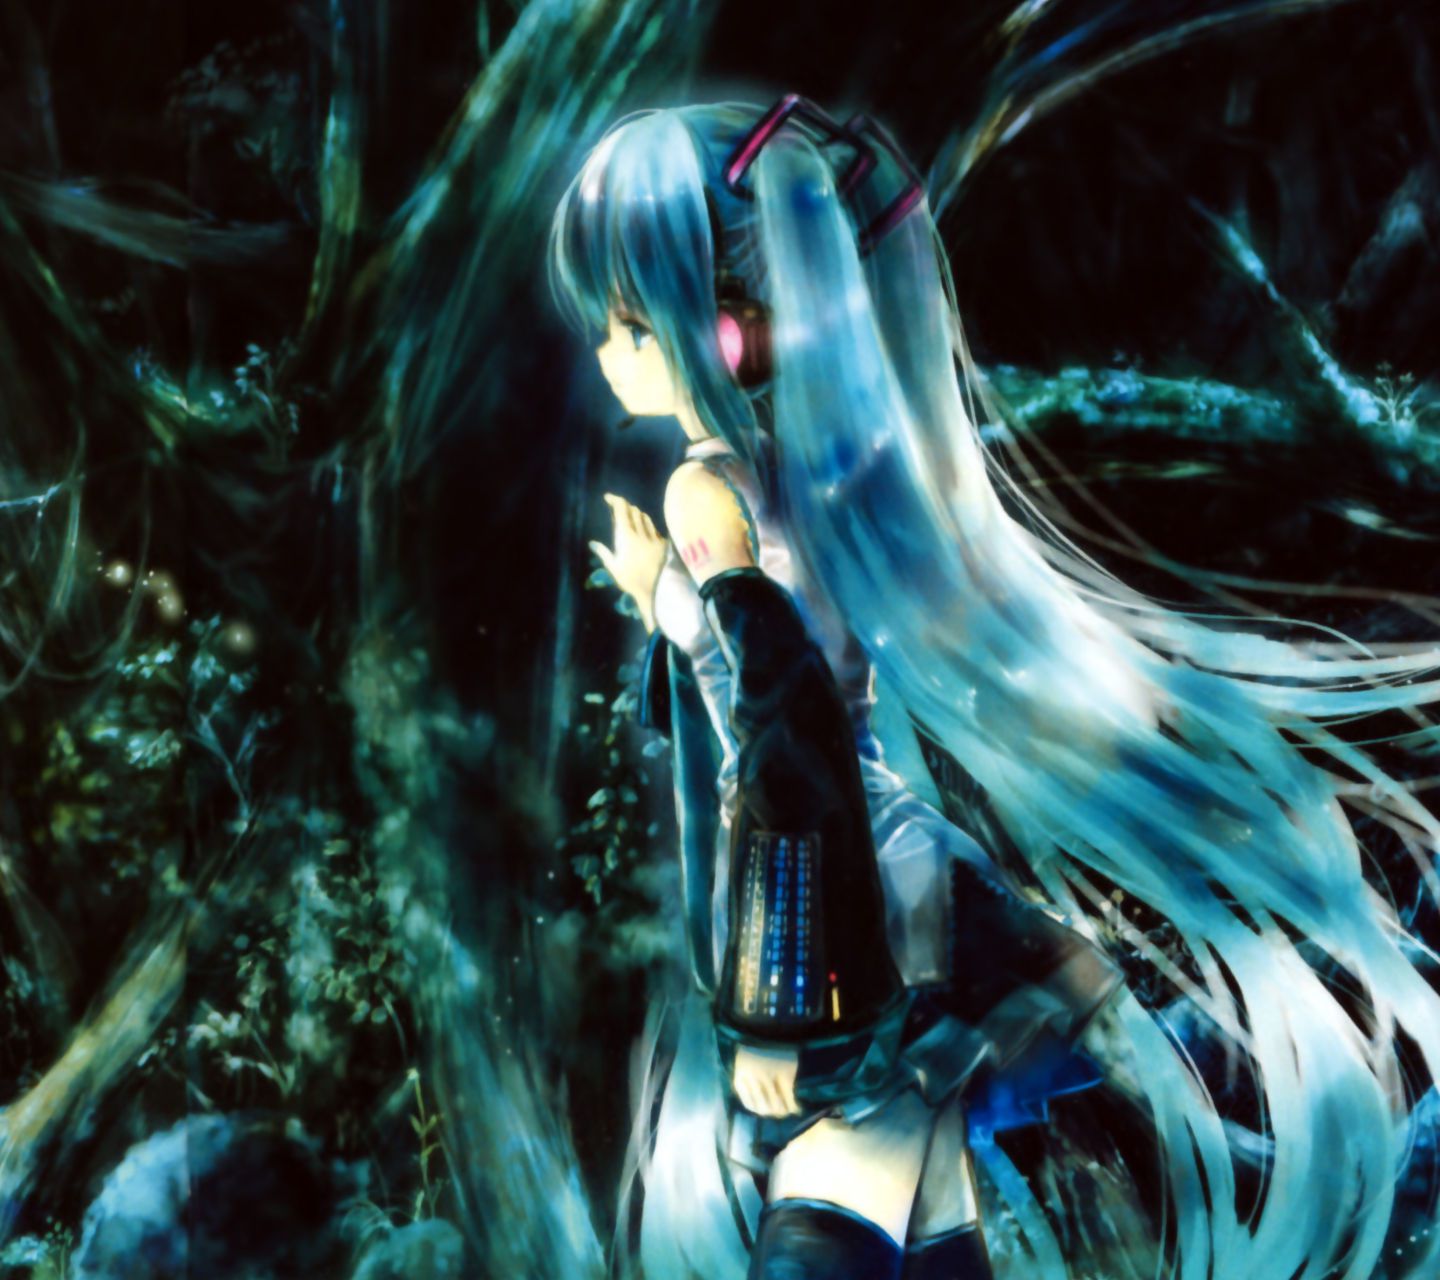 Vocaloid Android壁紙 3 初音ミク アニメ壁紙ネット Pc Android Iphone壁紙 画像